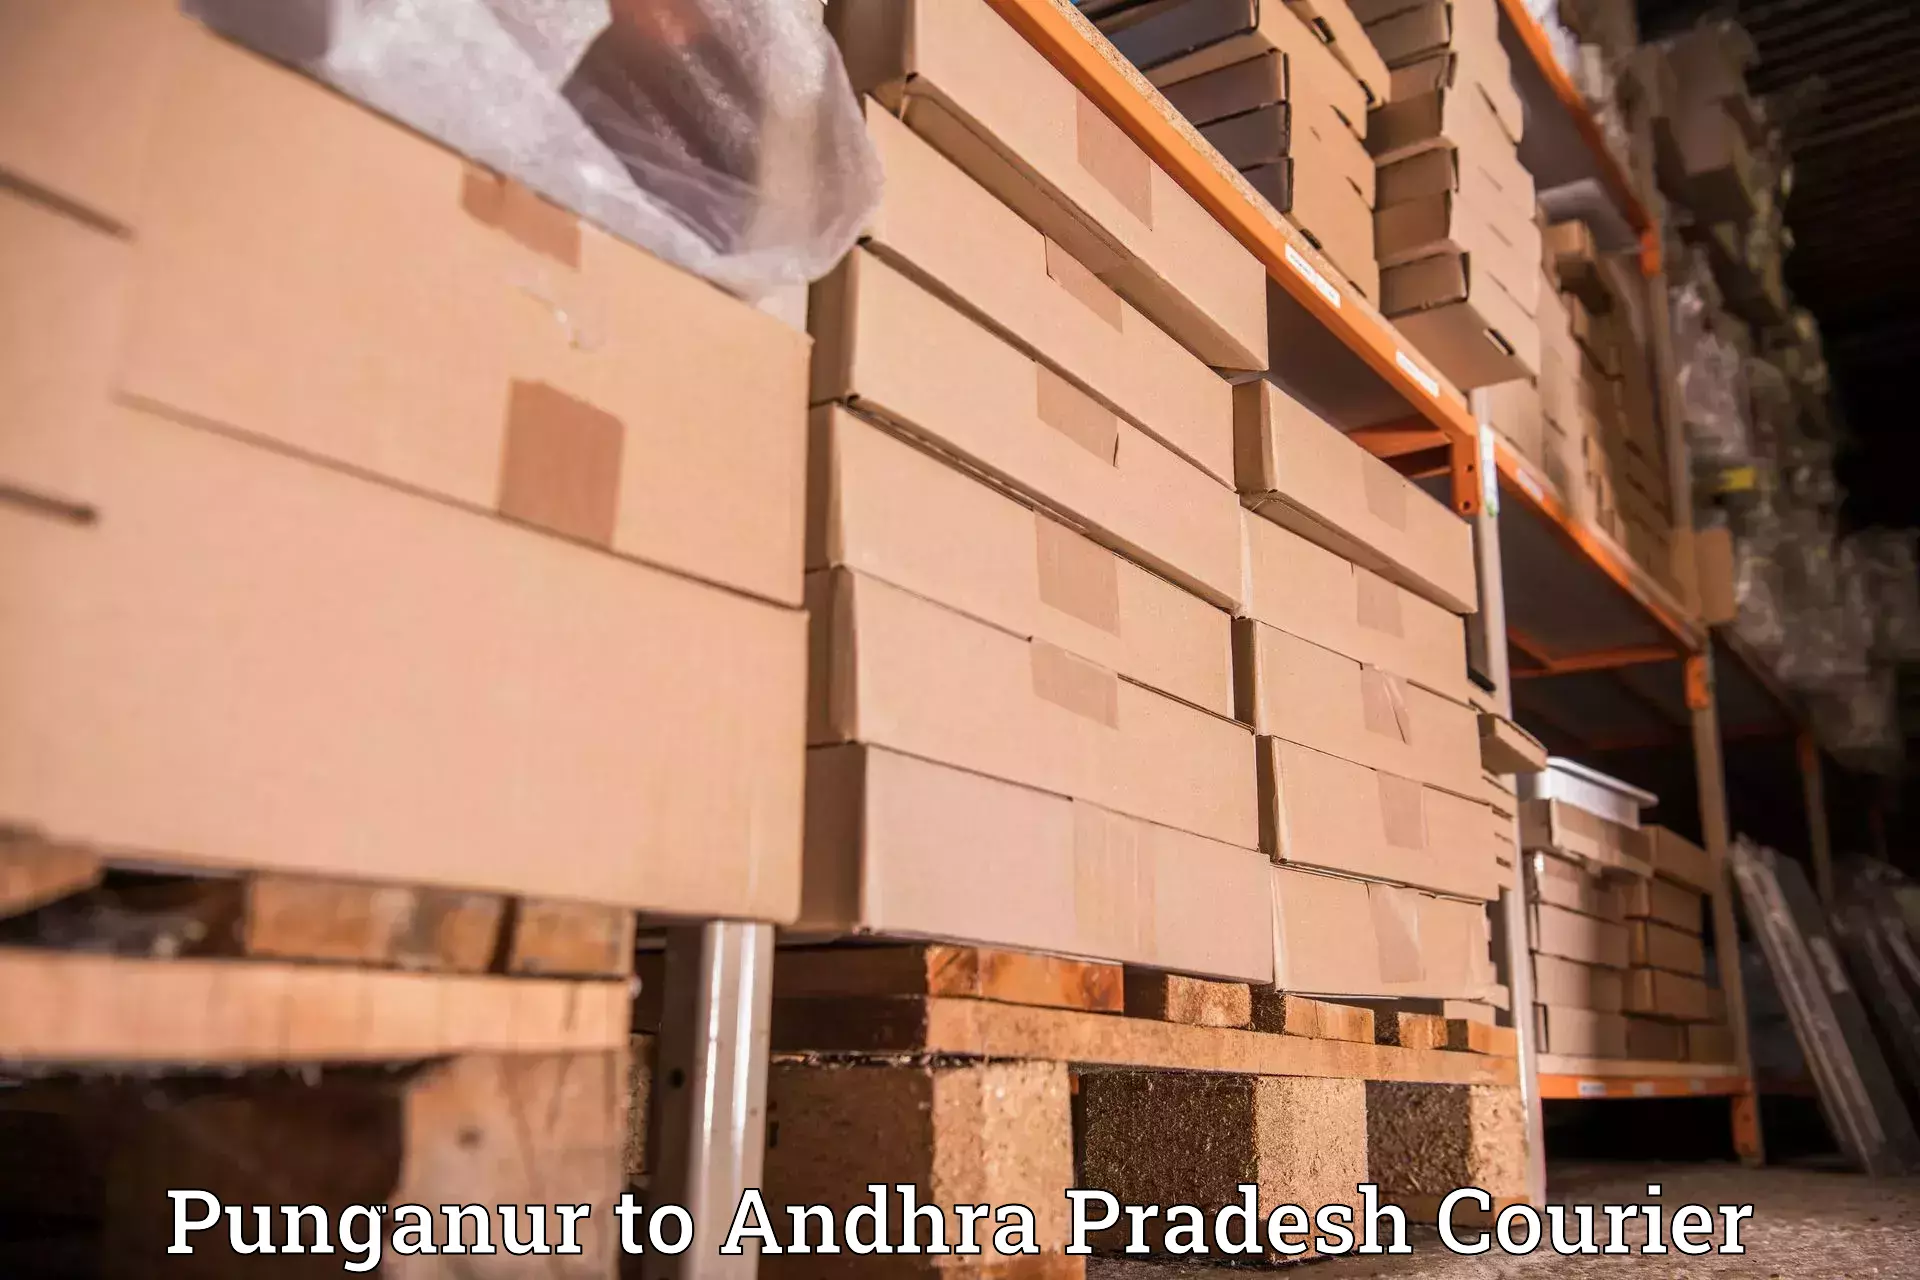 Package delivery network Punganur to Visakhapatnam Port